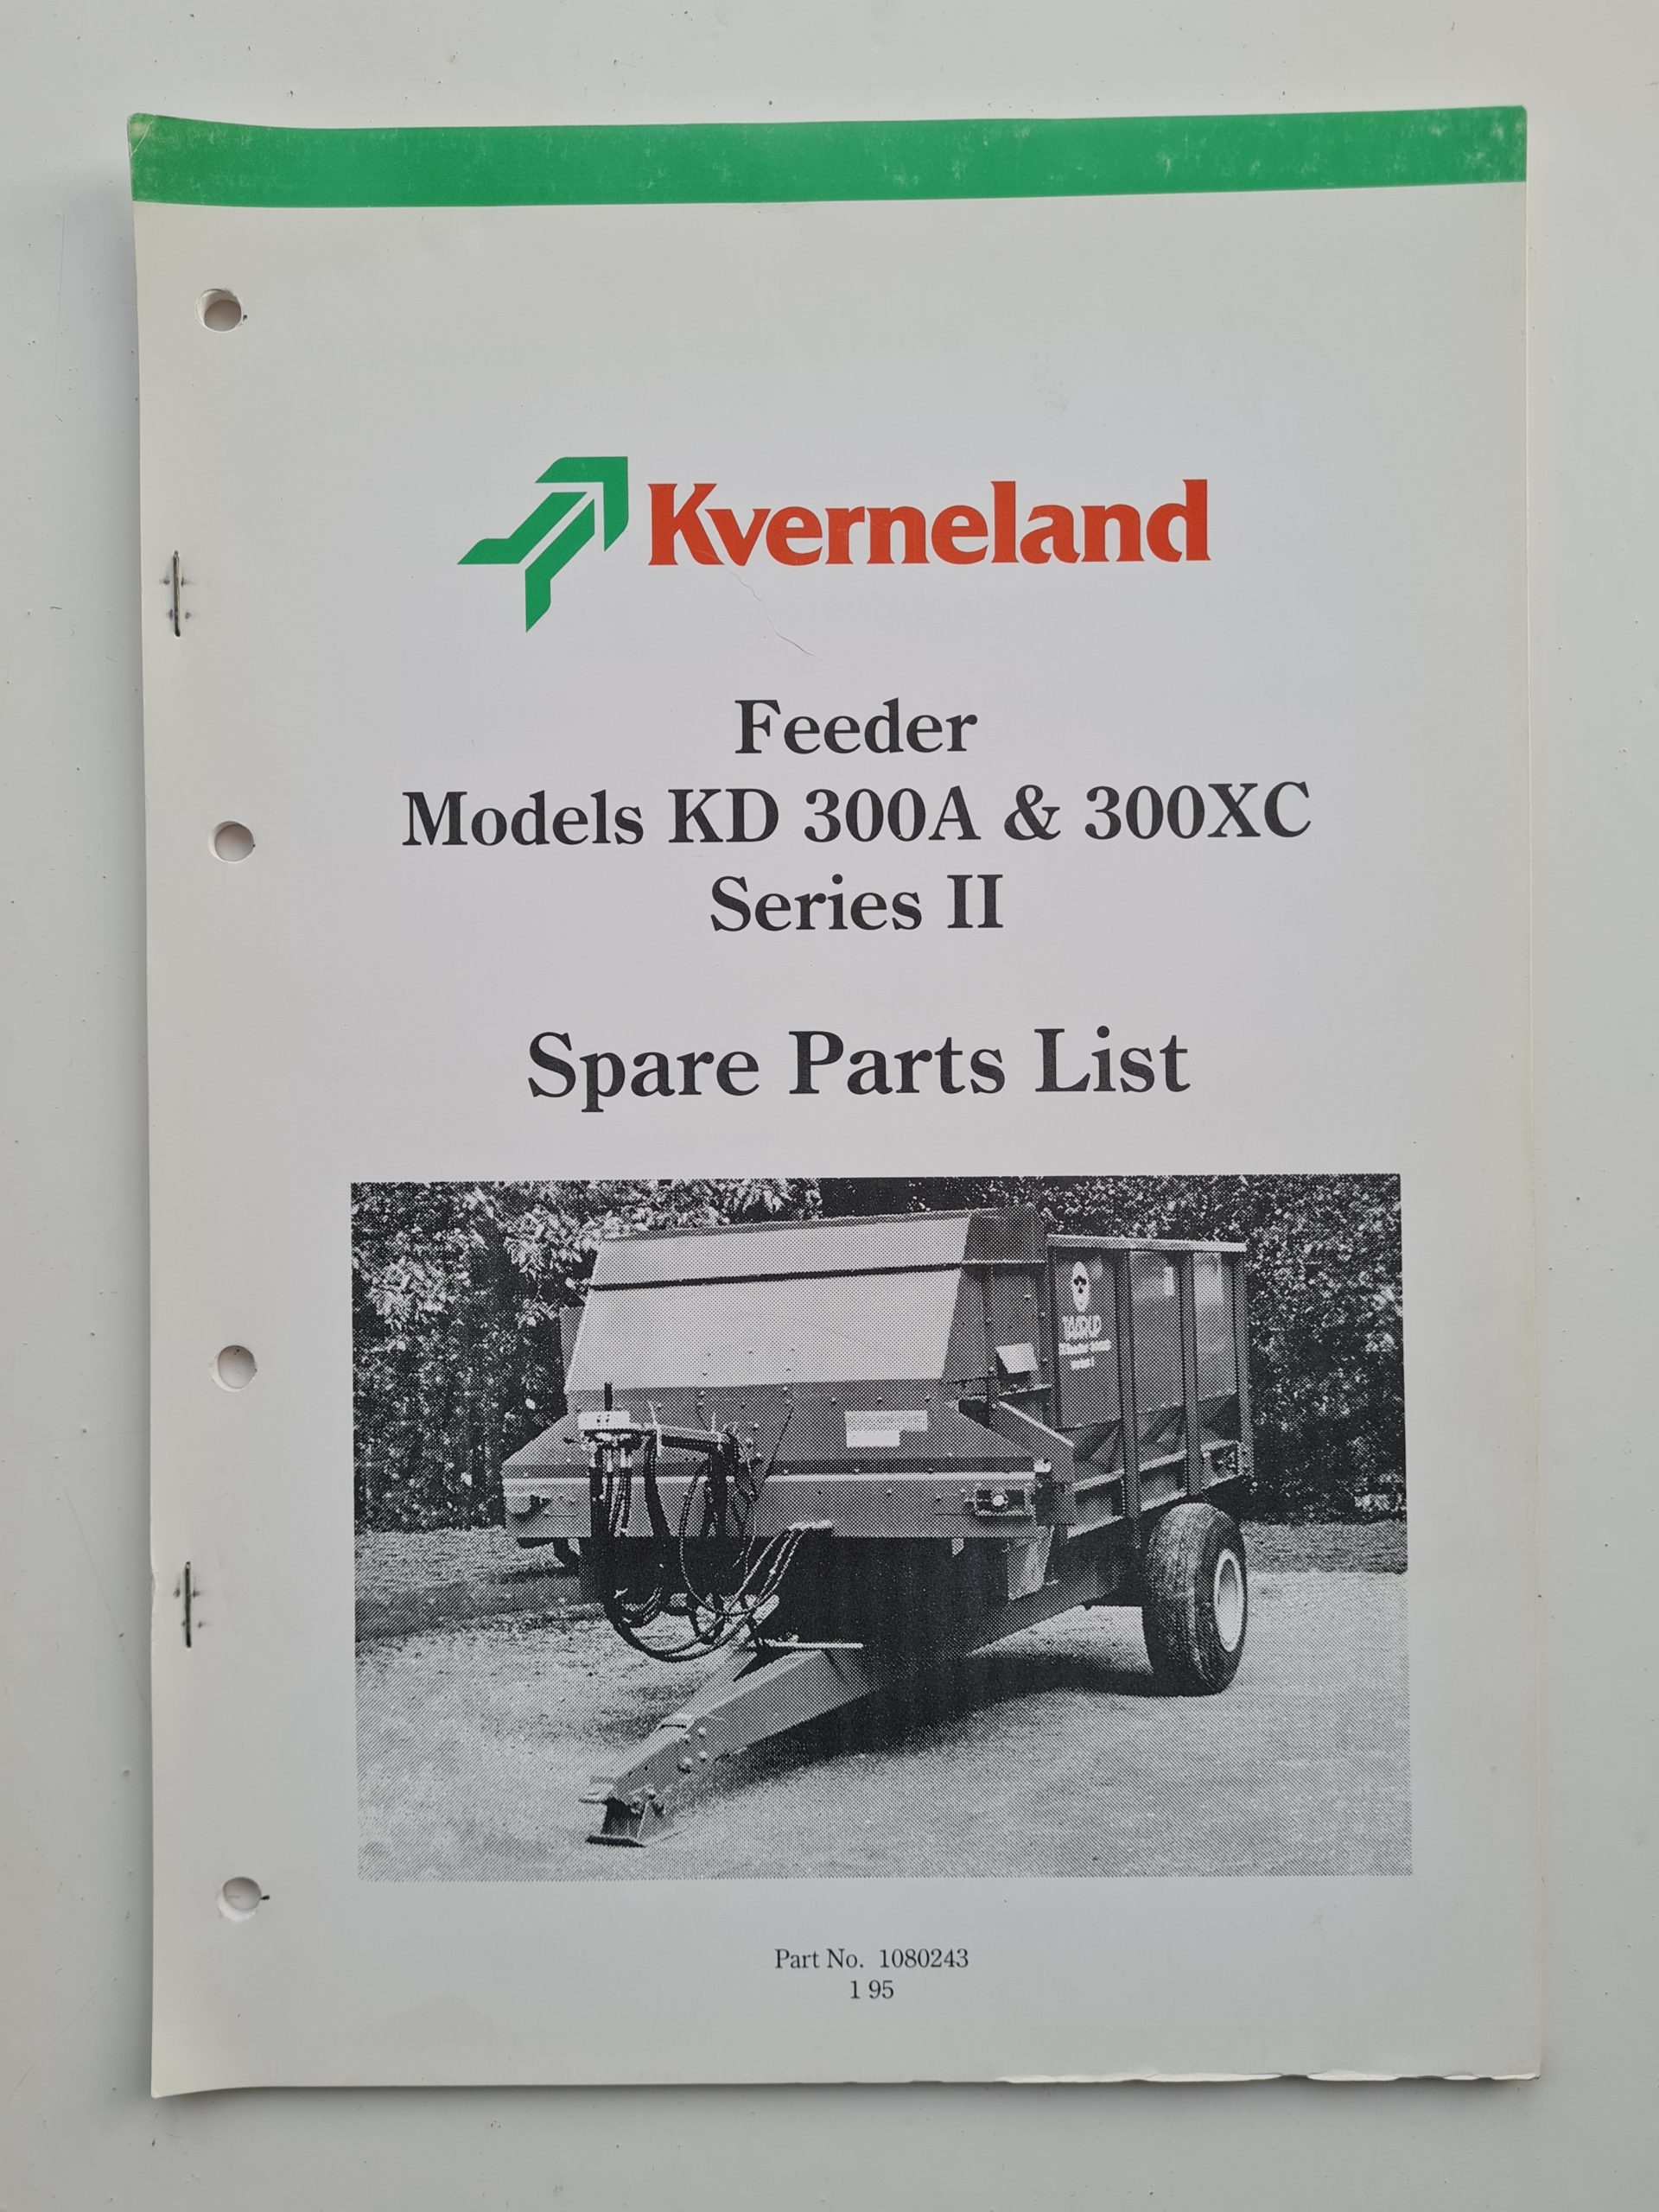 Kverneland KD 300A & 300XC Series II Feeder Parts Catalogue - SPS Parts